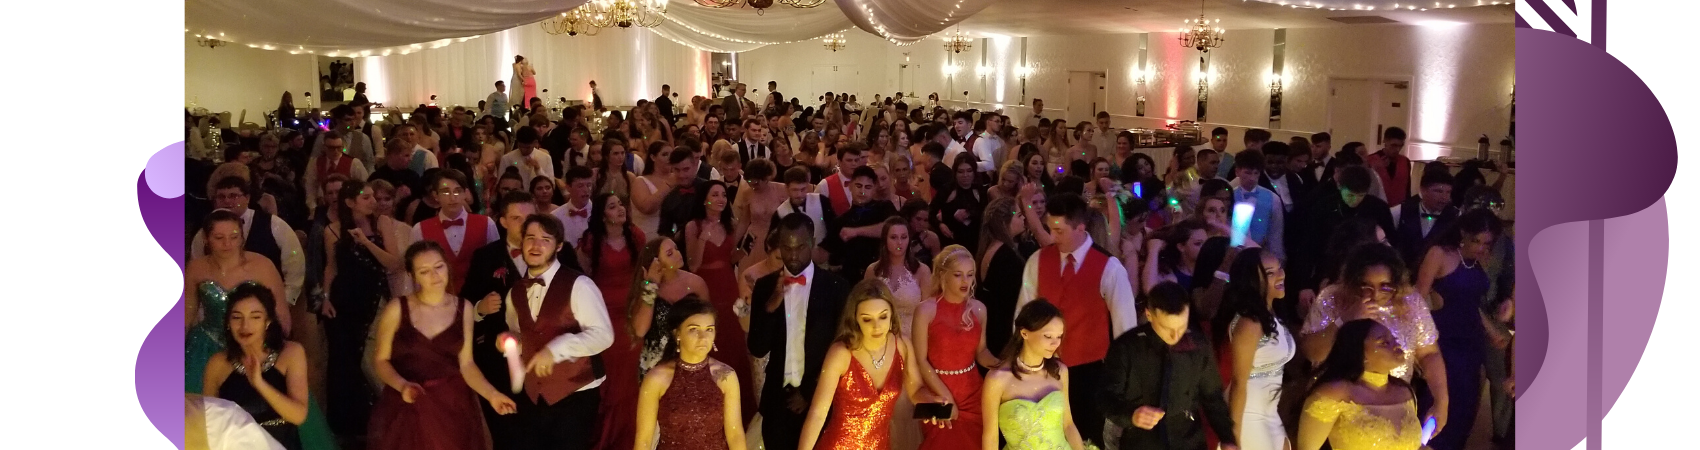 Large Group of Wedding Guests Dancing to DJ